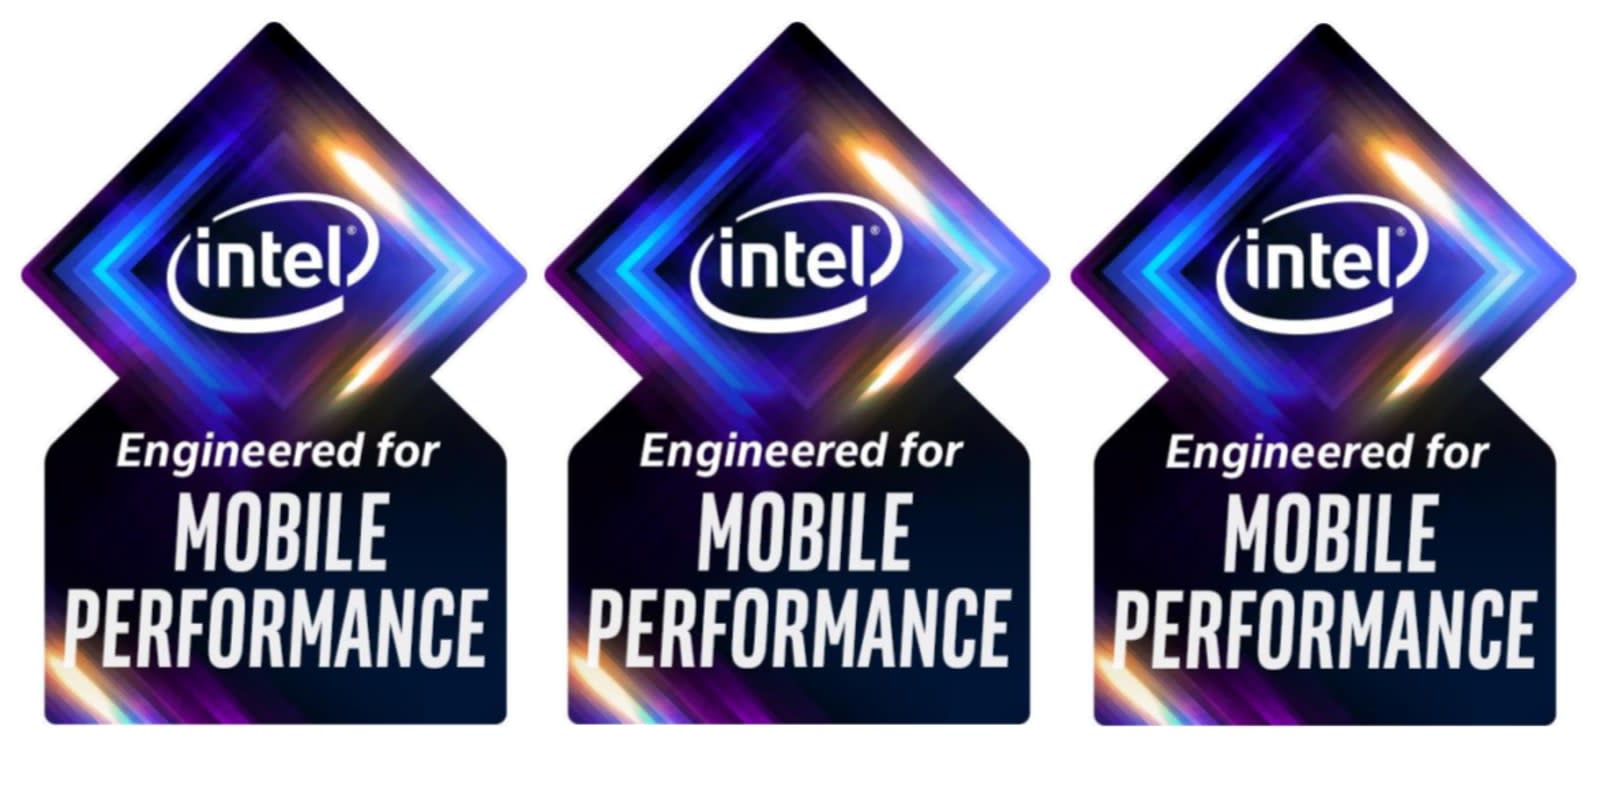 Project Athena Gets Its Own Version Of The Intel Inside Badge